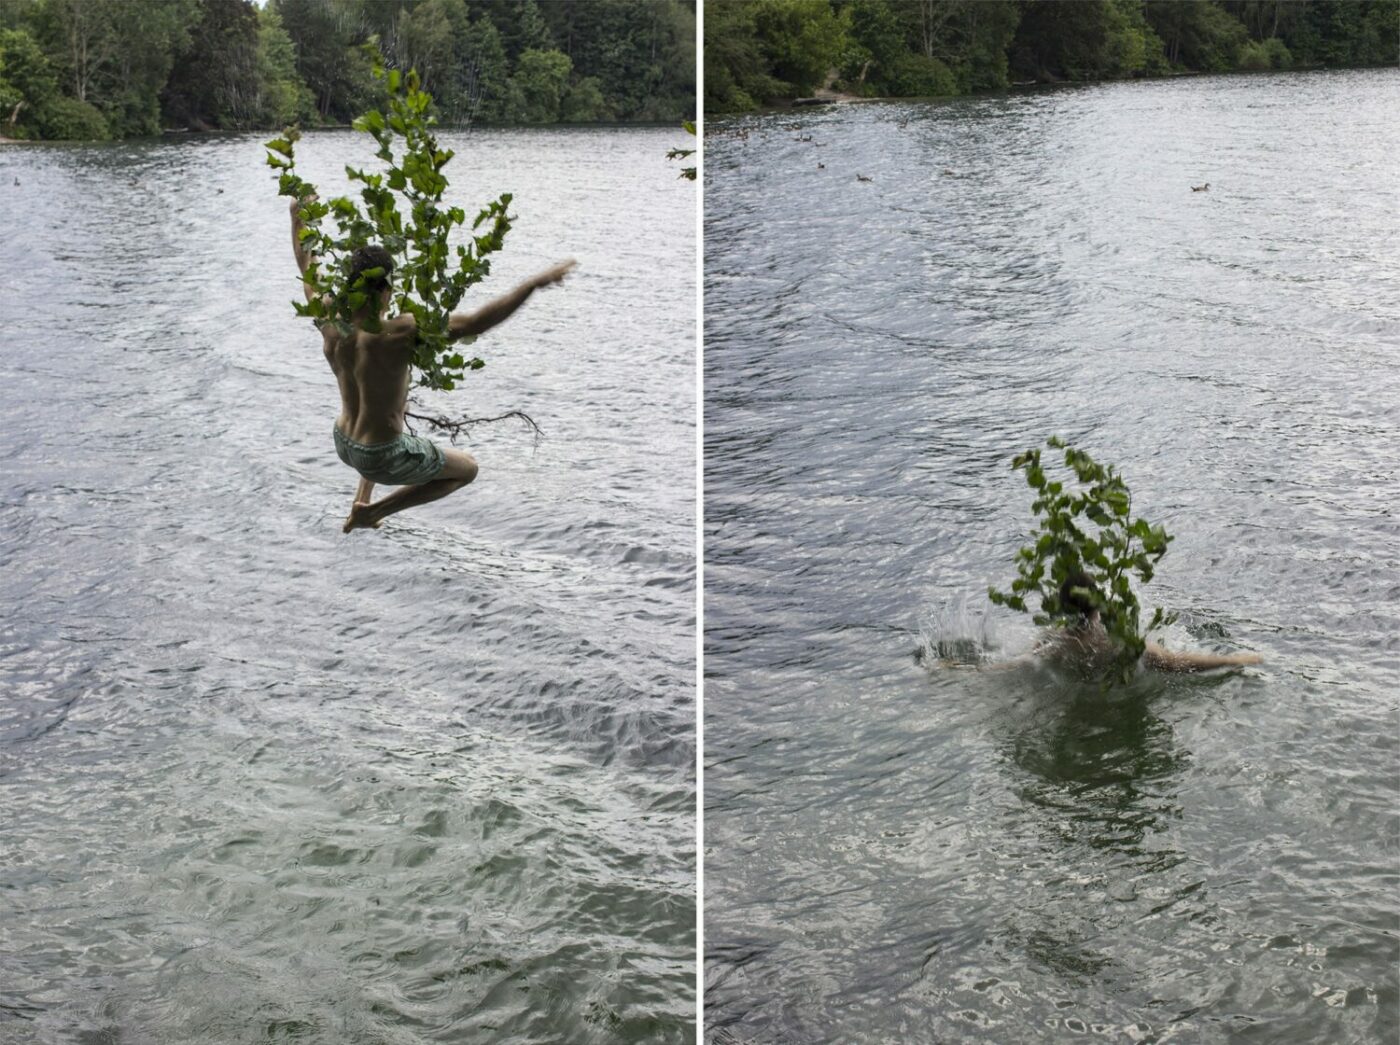 Jukai-Ryokō, jumping into the water with a hazel bush, inkjet print on Hahnemühle, dimensions variable, 2020